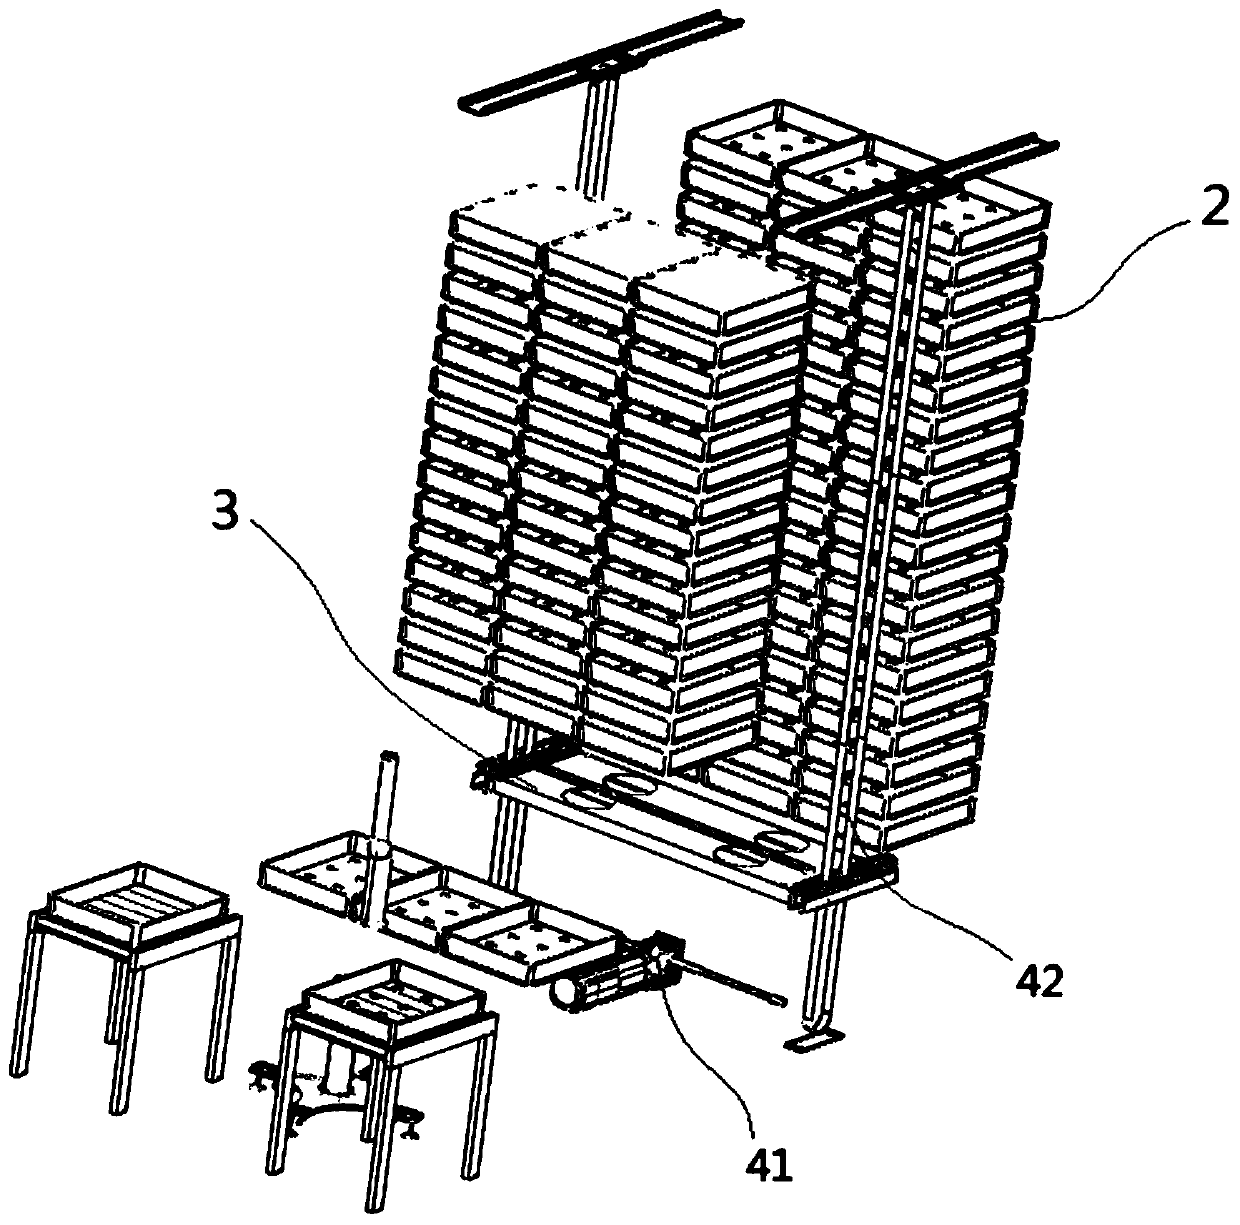 Vertical lifting, intelligent storage and material tray storage method